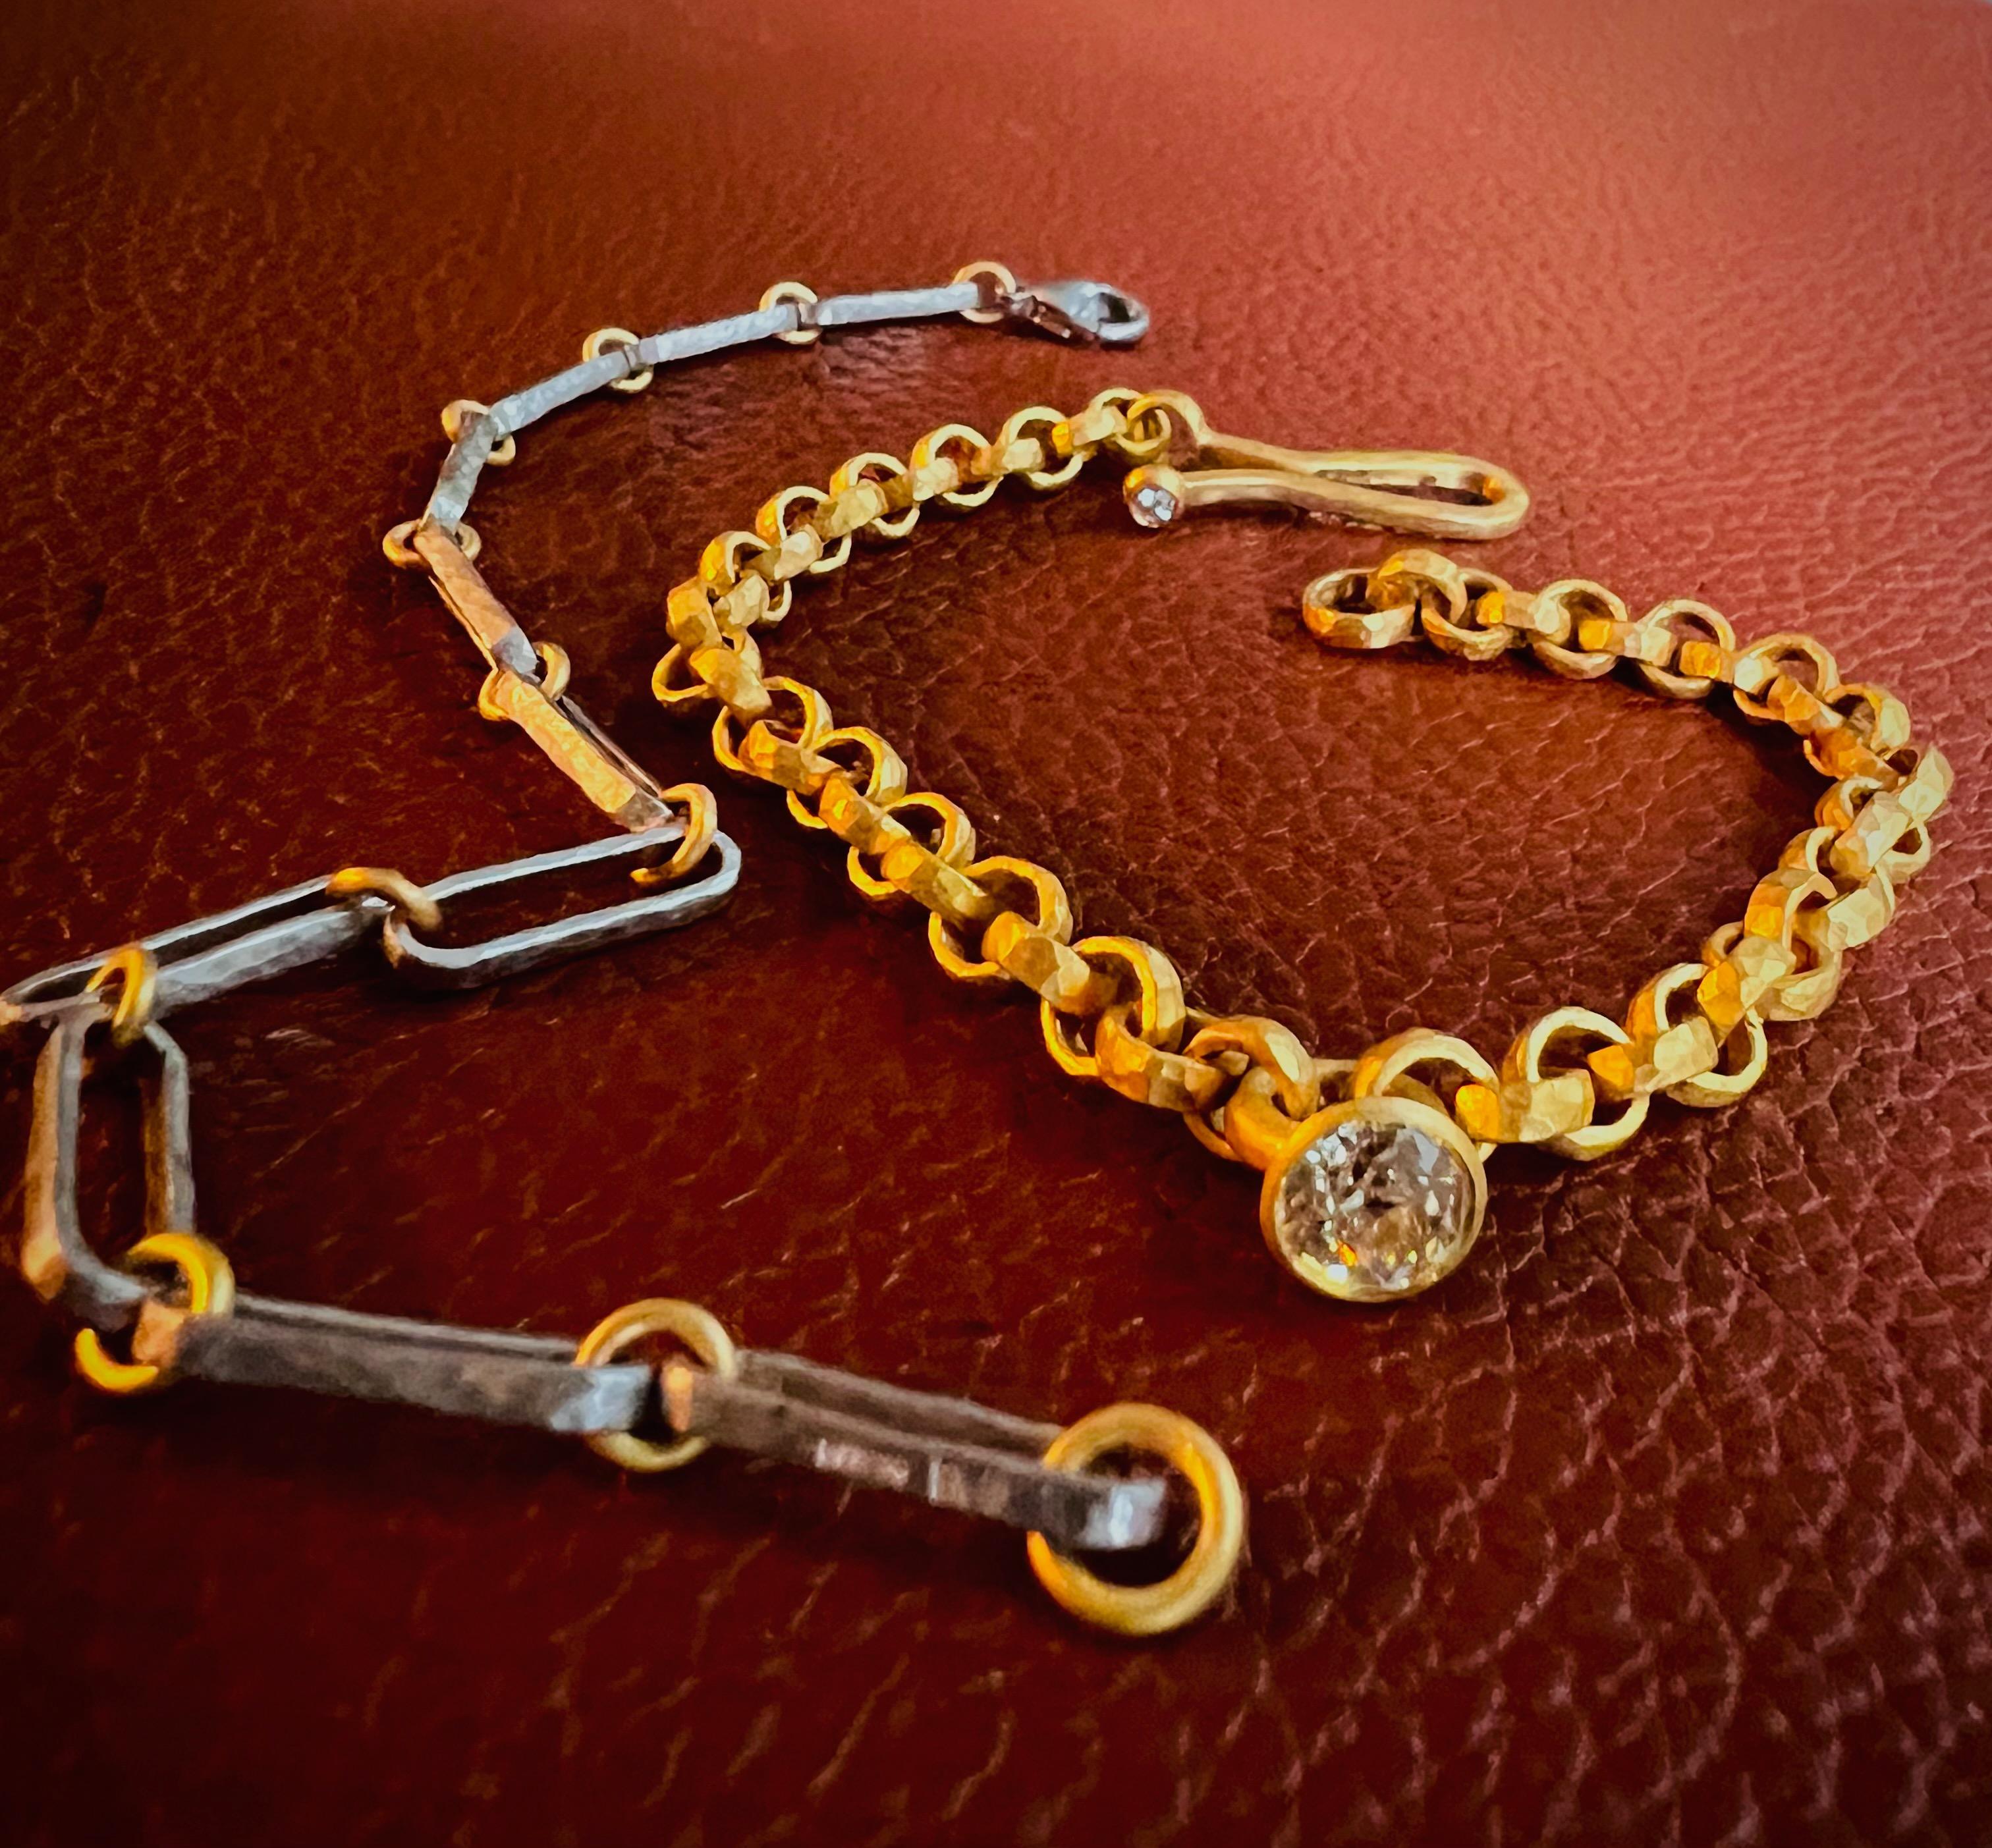 A 22ct gold hammered handmade link chain bracelet adorned with an antique old-cut round diamond set in 22ct gold. The combination of the craftsmanship of a handmade link chain bracelet, the richness of 22ct gold, and the allure of an antique old-cut